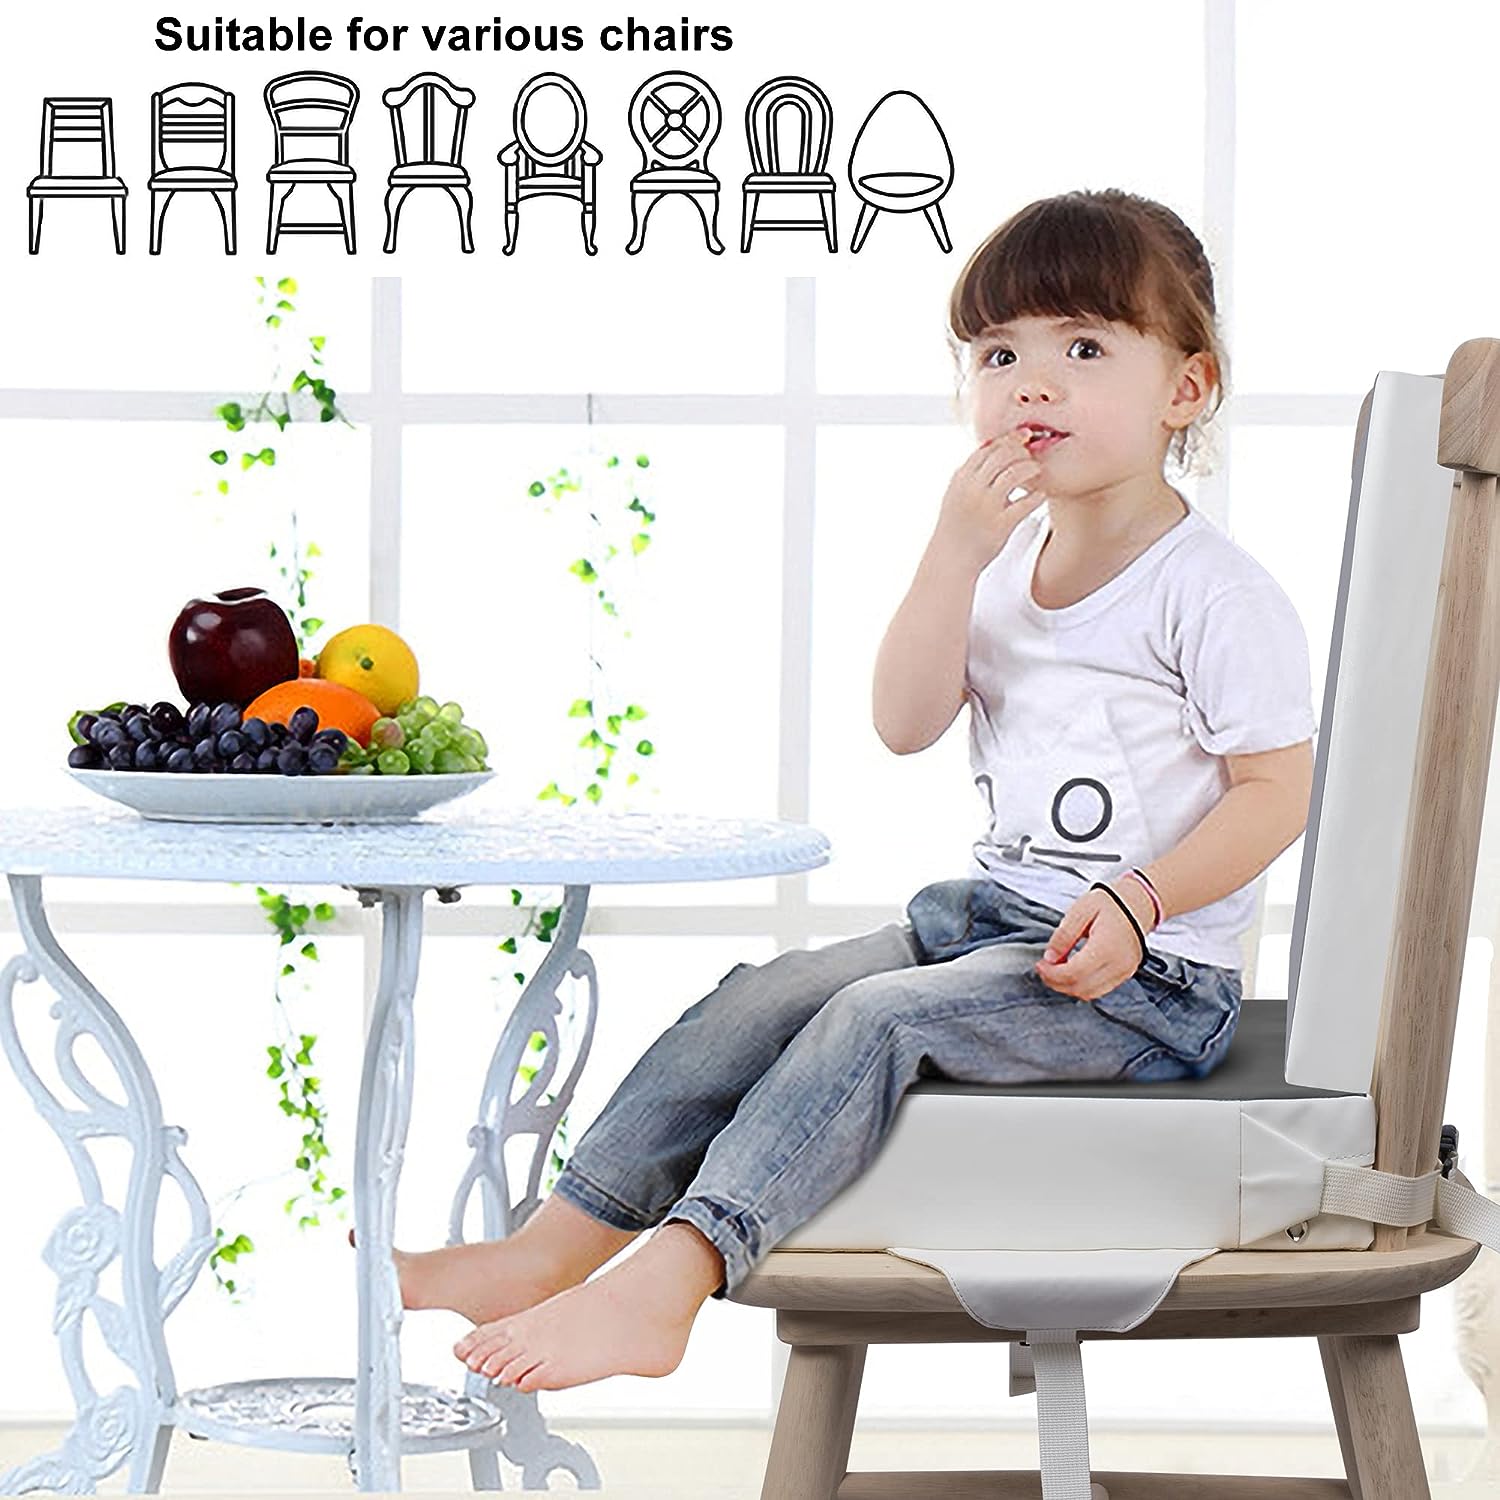 https://bigbigmart.com/wp-content/uploads/2023/10/Kalawen-Toddler-Booster-Seat-for-Dining-Table-Upgraded-2Pcs-PU-Washable-Straps-Safety-Buckle-Kids-Booster-Seat-for-Table-Portable-Travel8.jpg